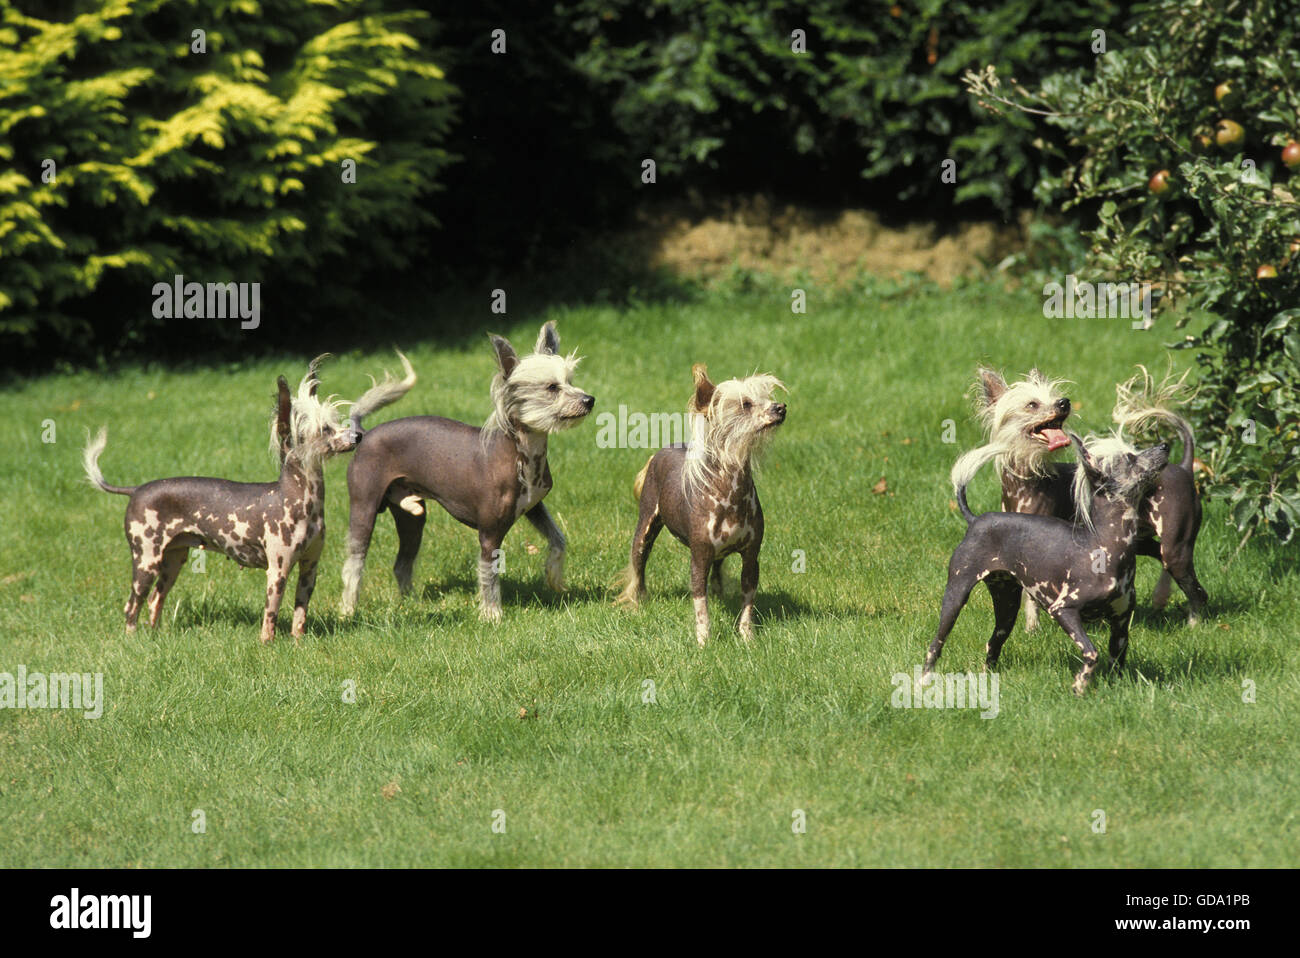 Chinese Crested Dog standing on Grass Stock Photo